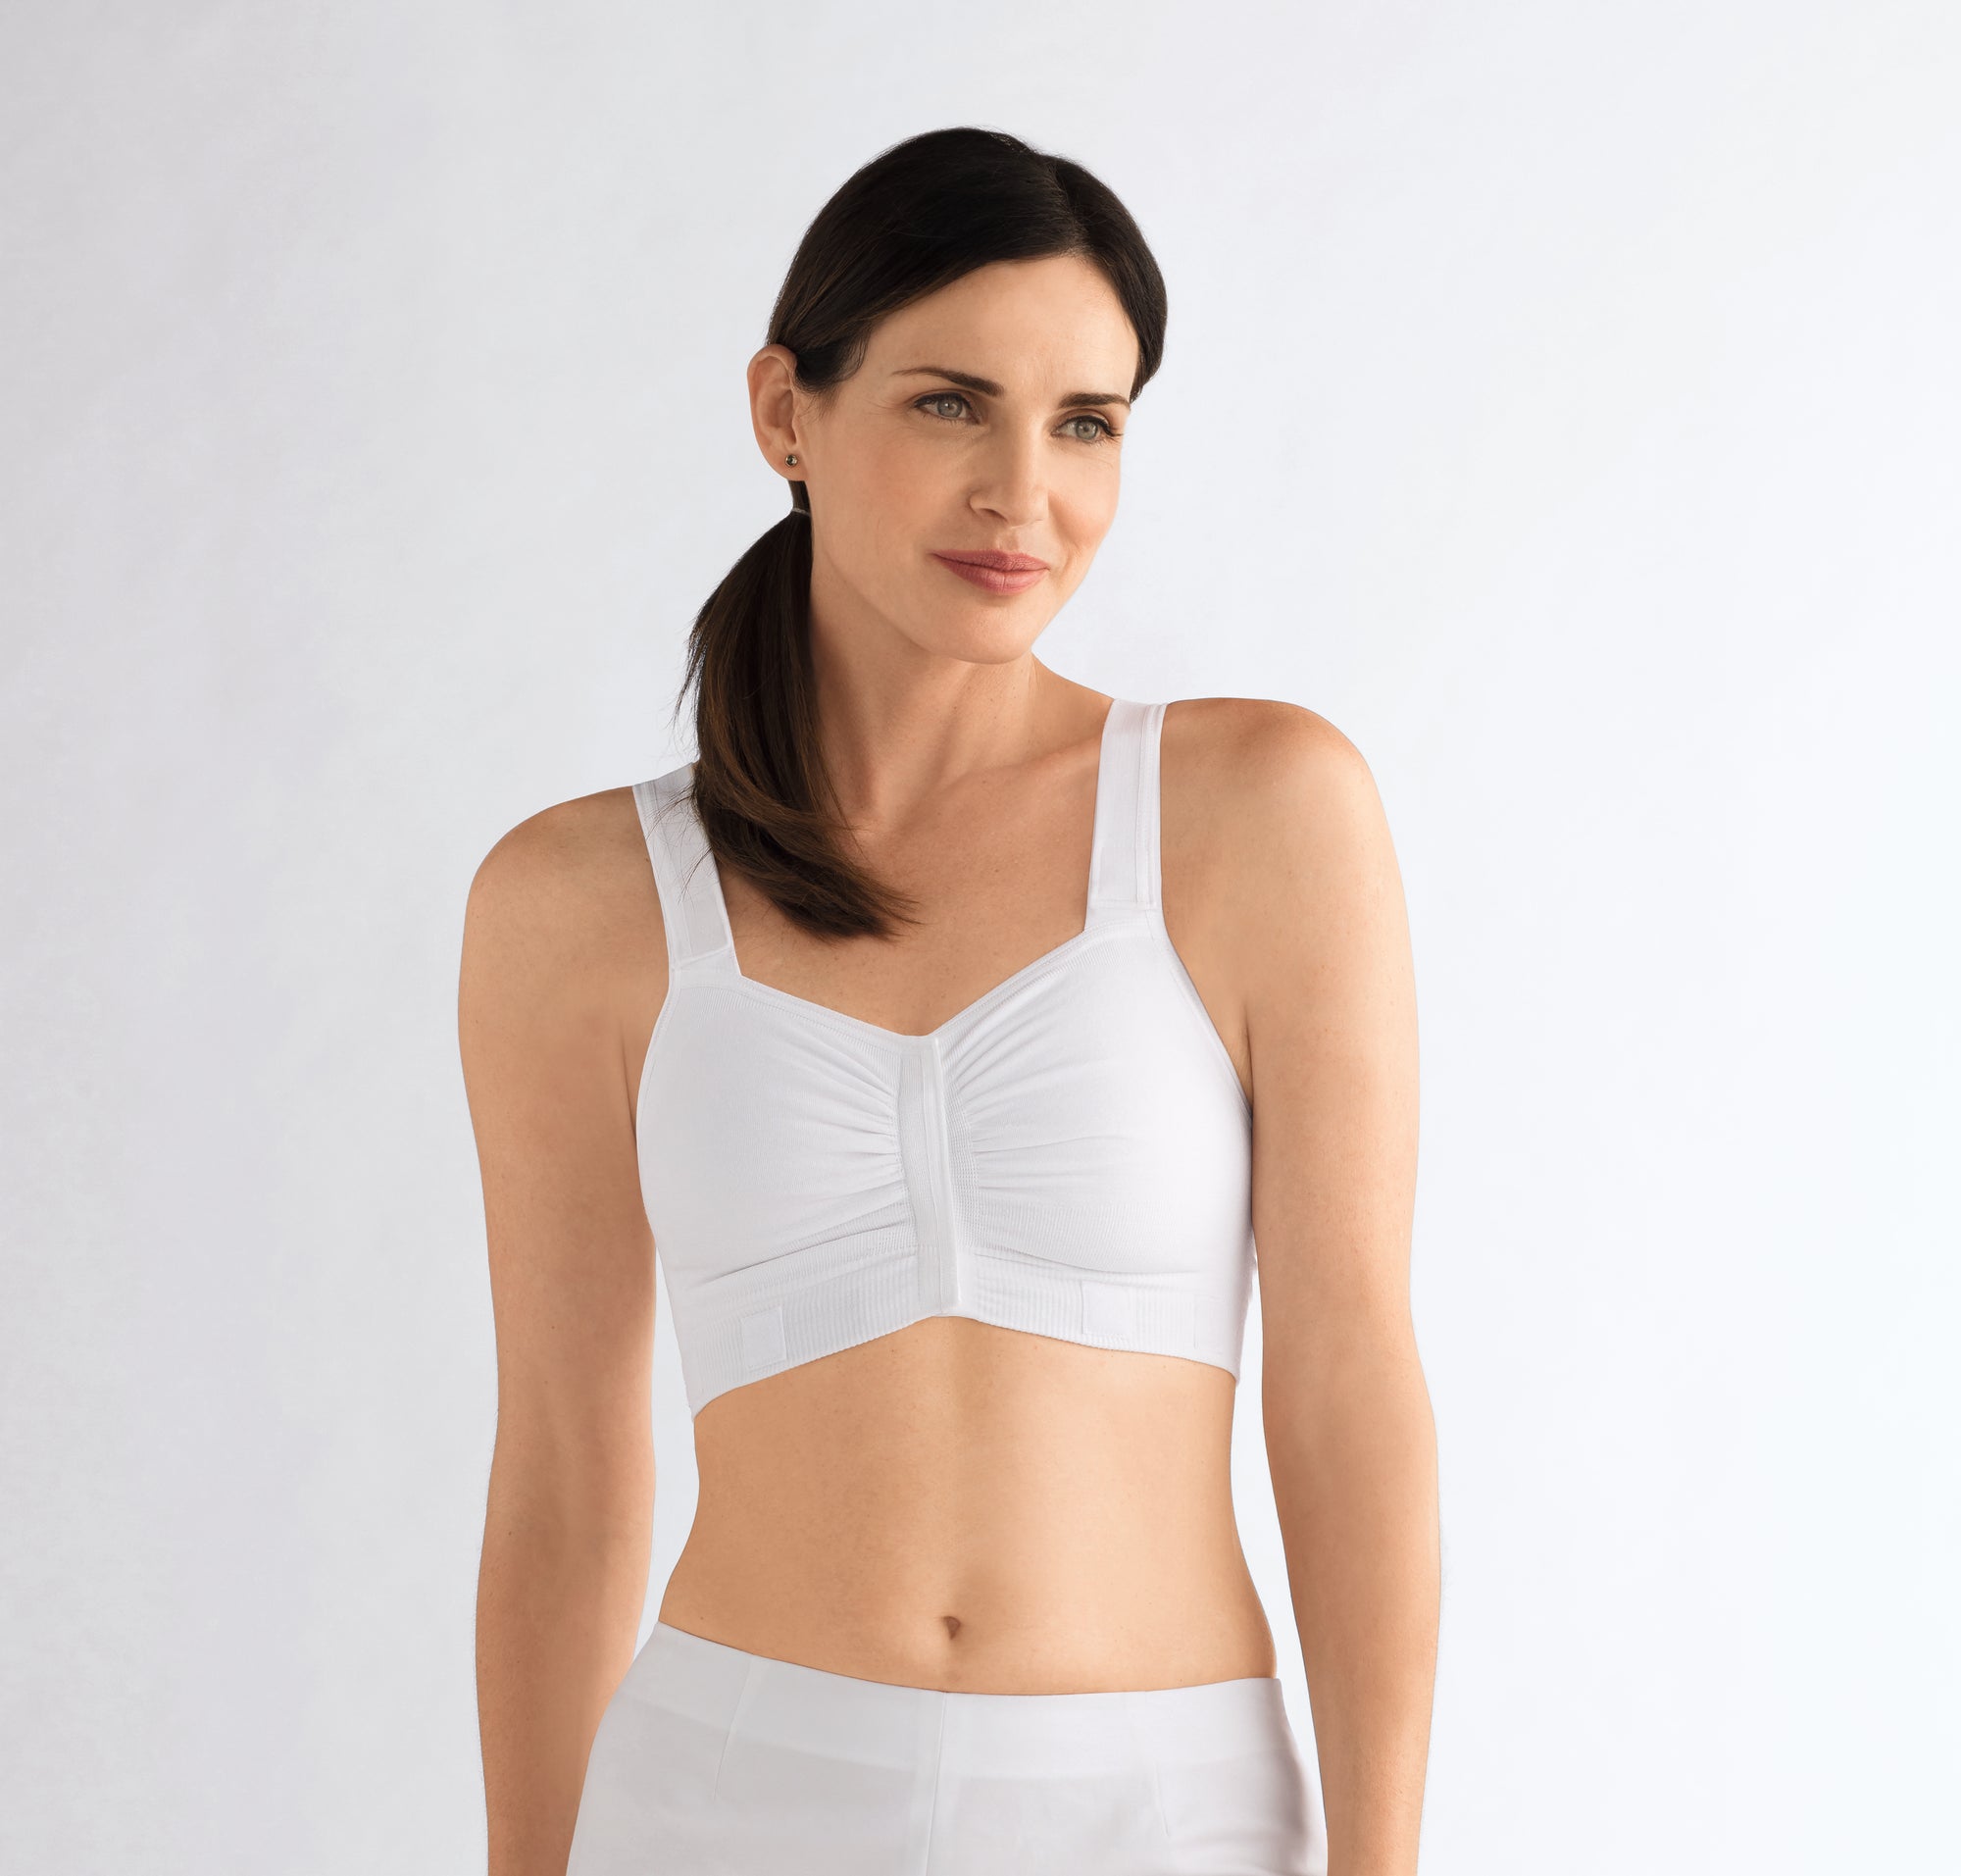 Amoena Frances After Mastectomy Bra - Breast Surgery Recovery Bra